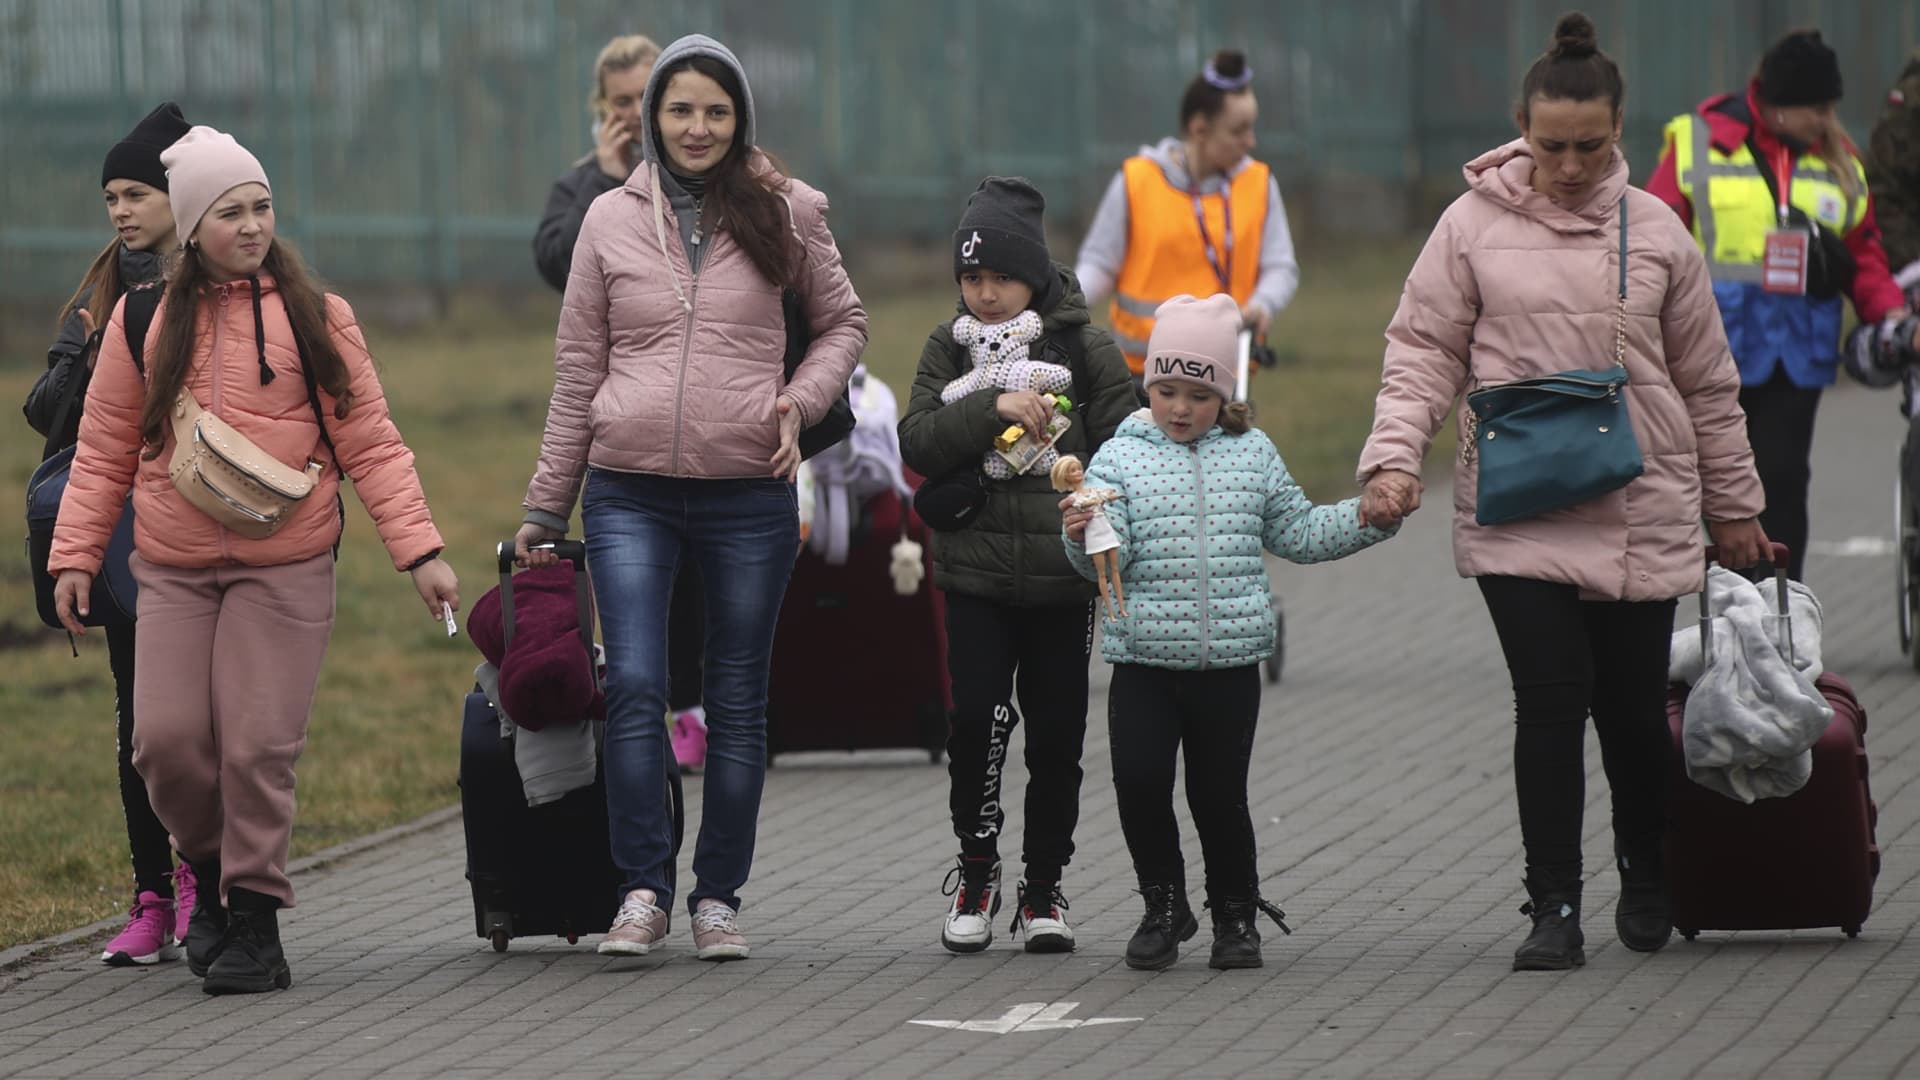 Civilians, fleeing from Ukraine due to ongoing Russian attacks, continue to arrive at the Medyka border in Przemysl, Poland on March 31, 2022.